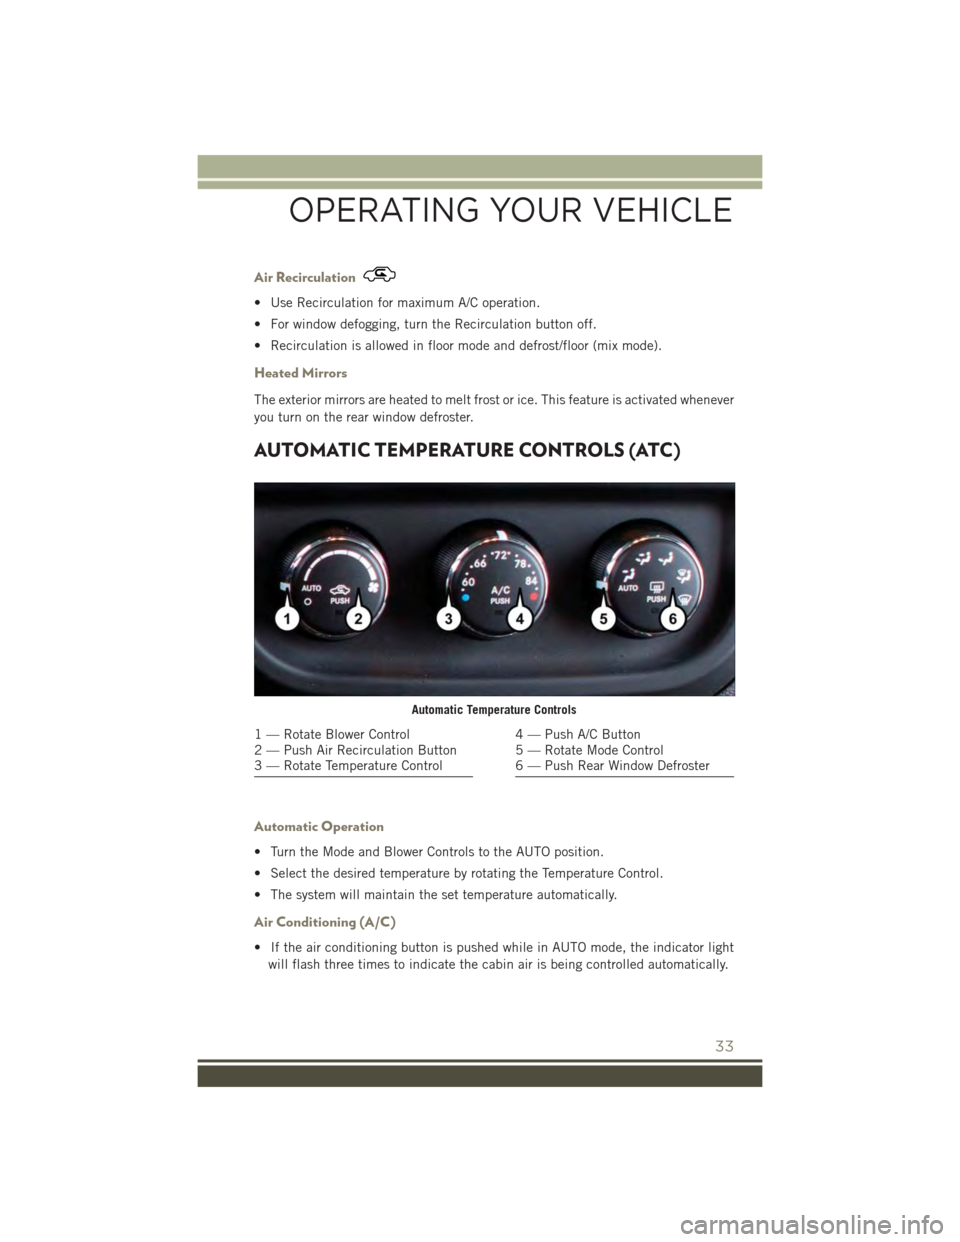 JEEP PATRIOT 2015 1.G User Guide Air Recirculation
• Use Recirculation for maximum A/C operation.
• For window defogging, turn the Recirculation button off.
• Recirculation is allowed in floor mode and defrost/floor (mix mode).